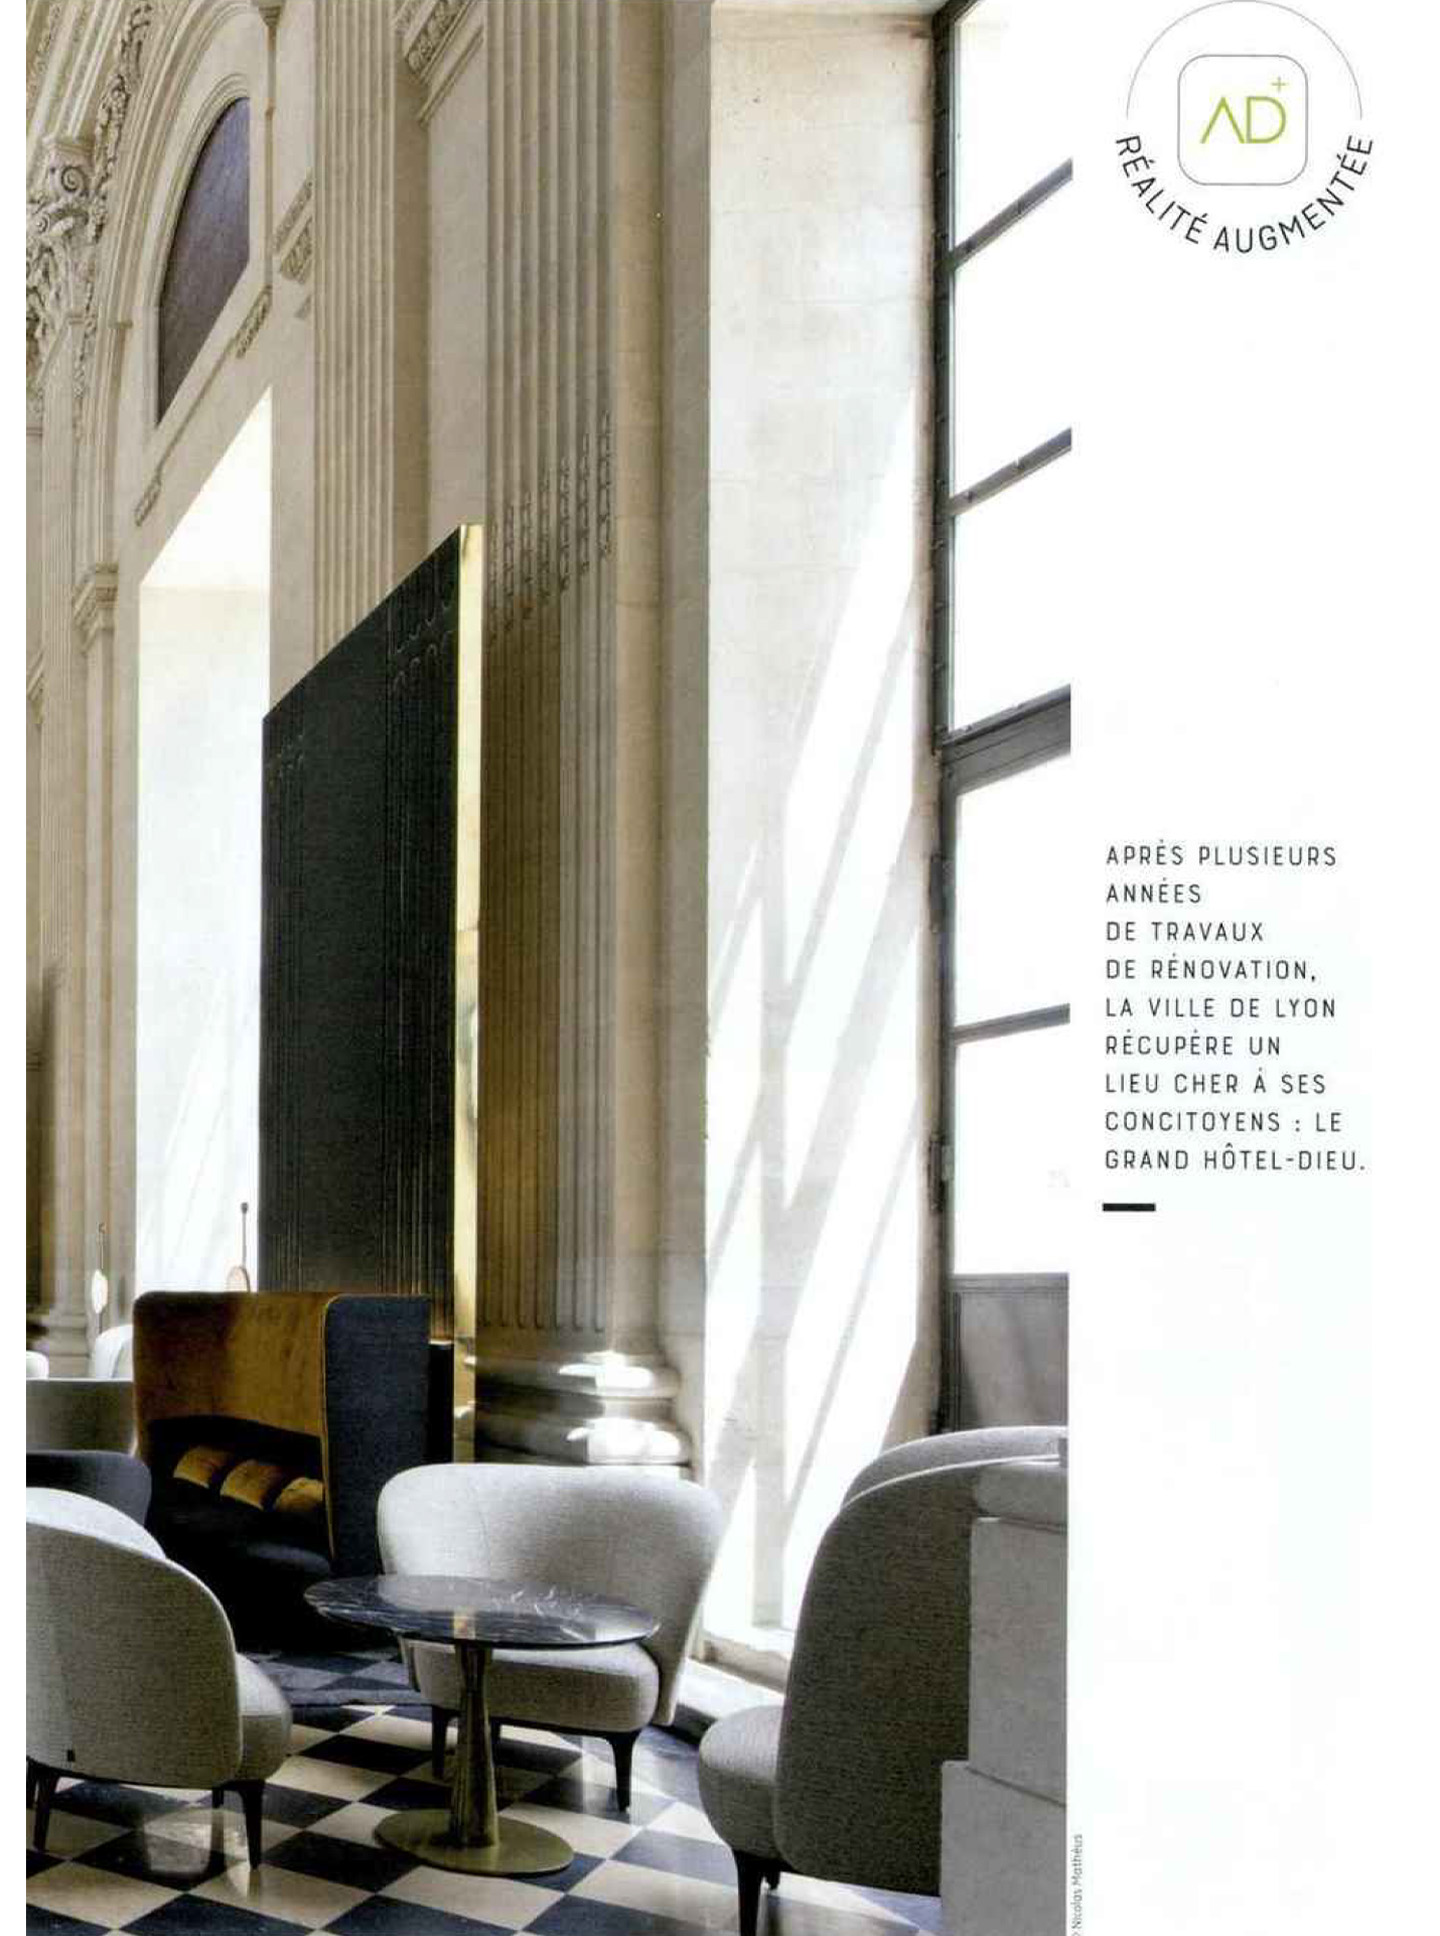 Article on the InterContinental Lyon Hotel Dieu realized by the studio jean-Philippe Nuel in the magazine NDA, new luxury hotel, luxury interior design, historical heritage